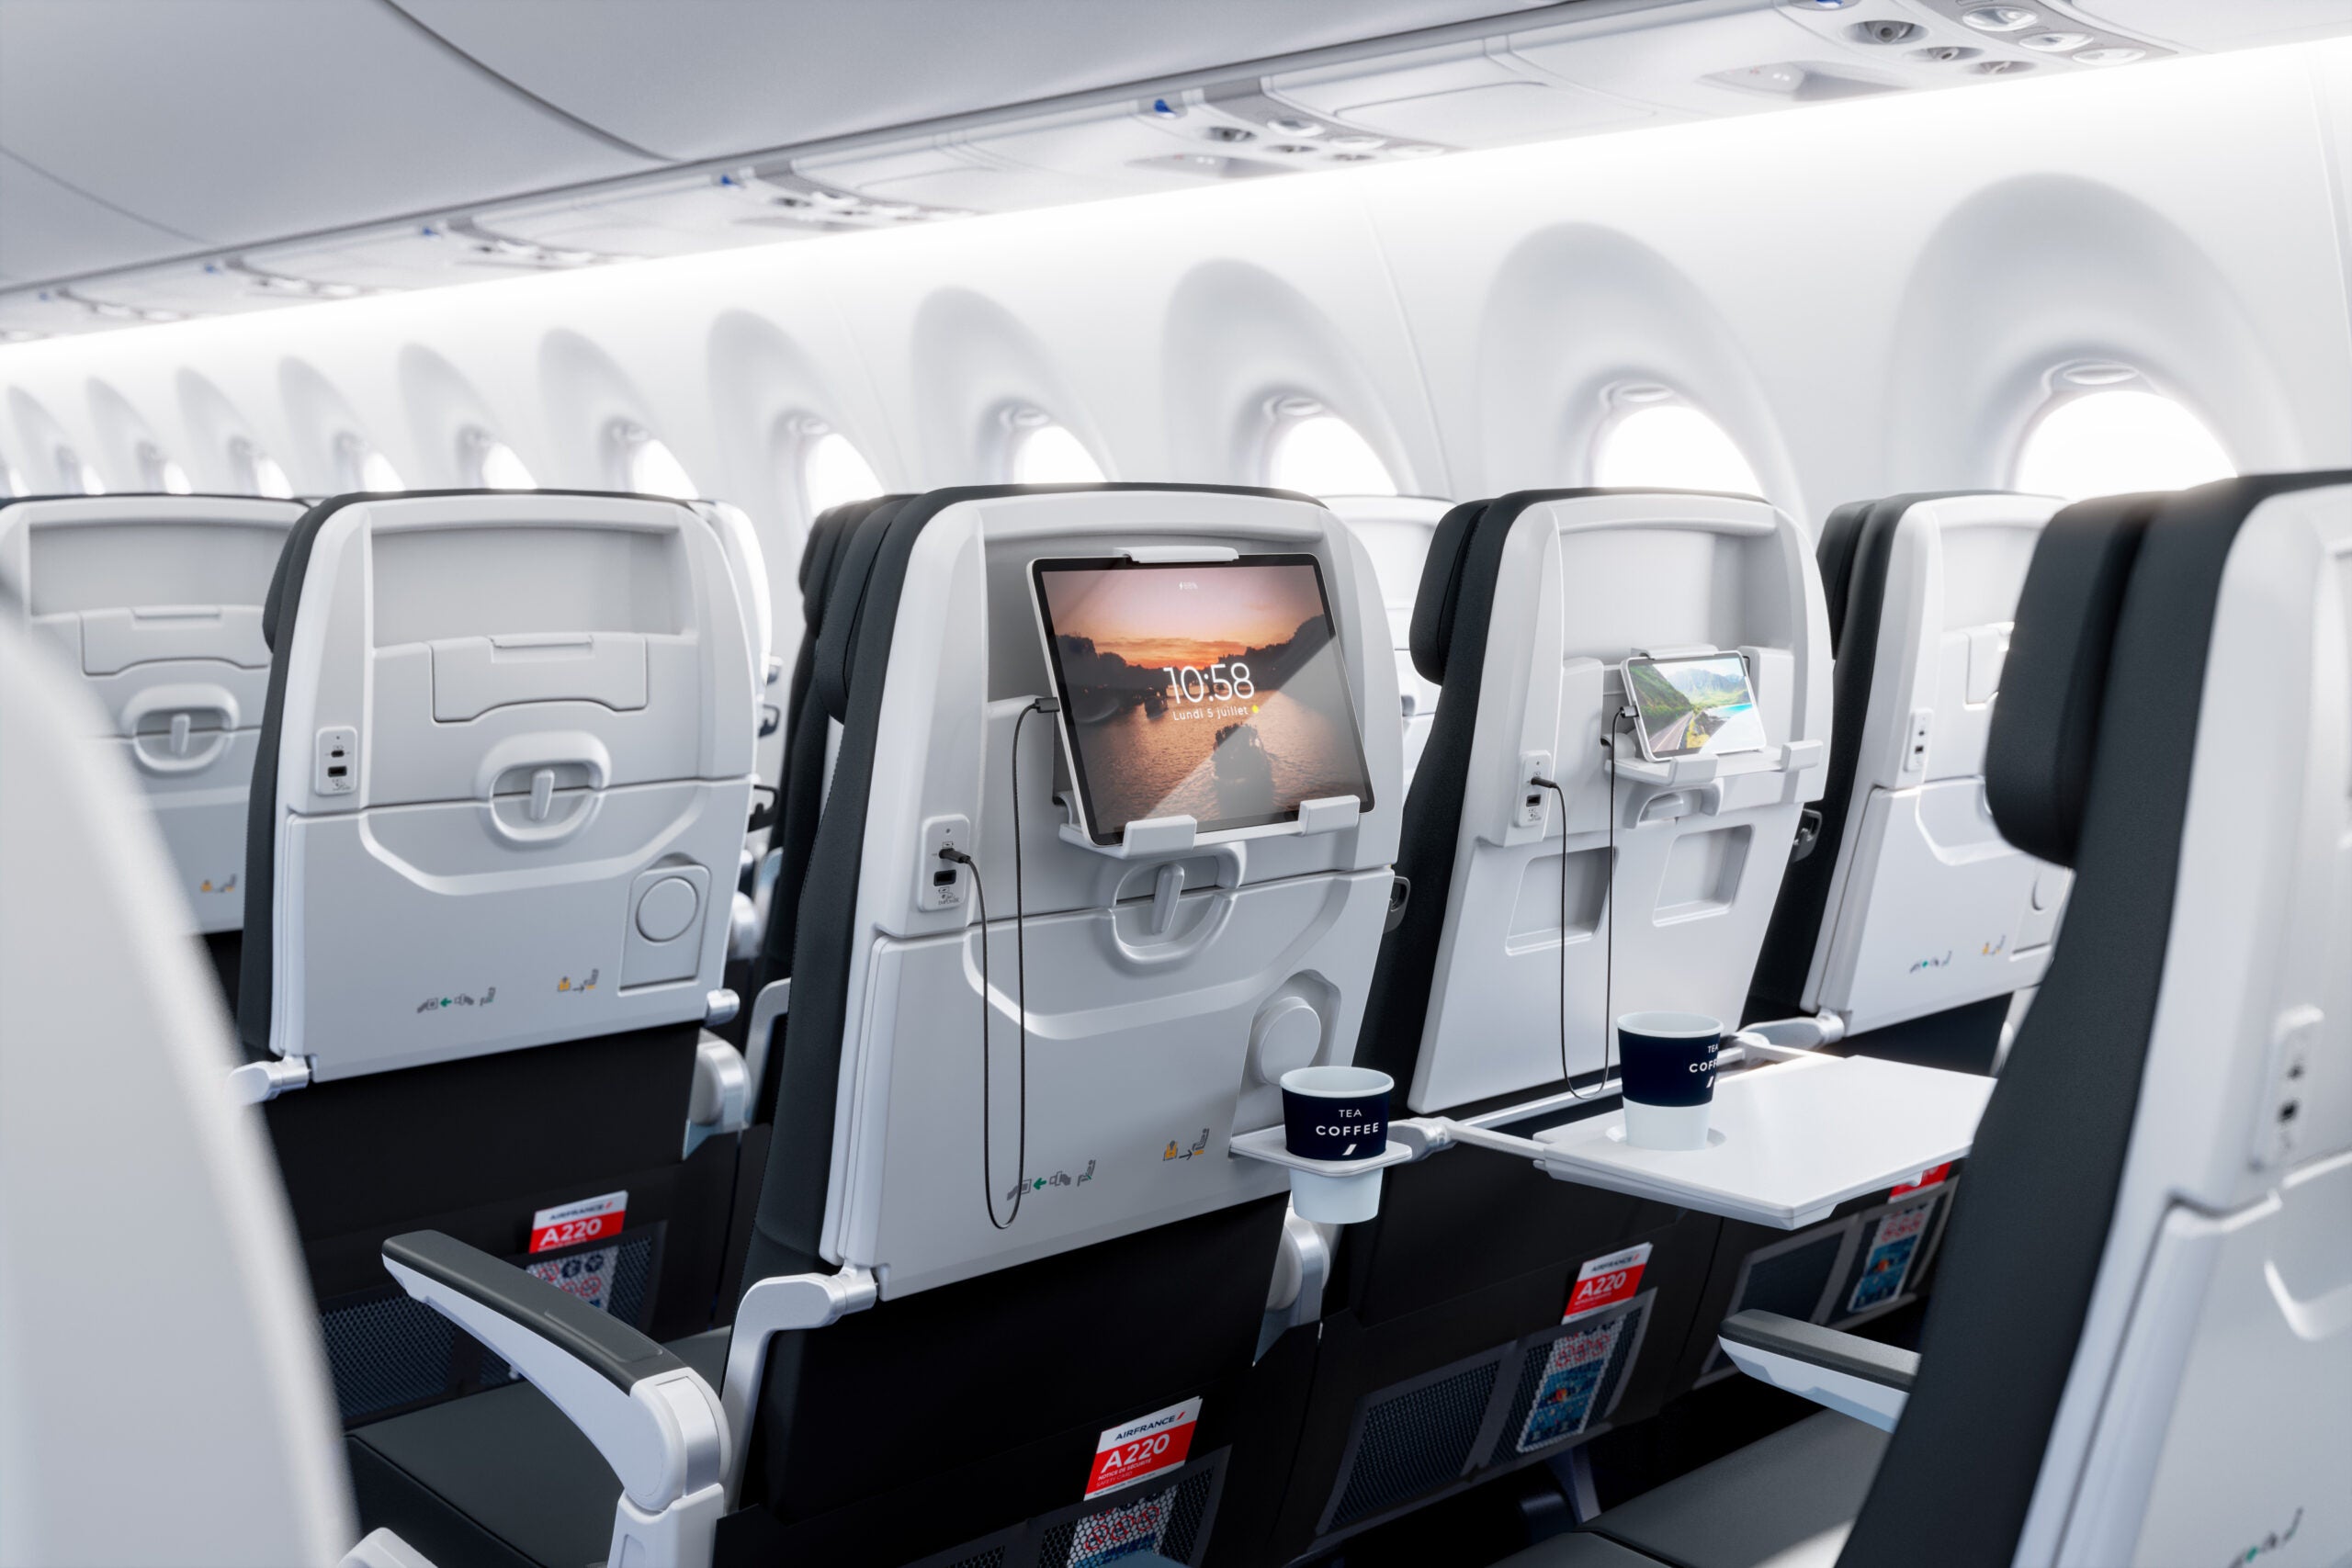 The cabin of the new A220-300 offers a more spacious experience for passengers. (photo courtesy of Air France)